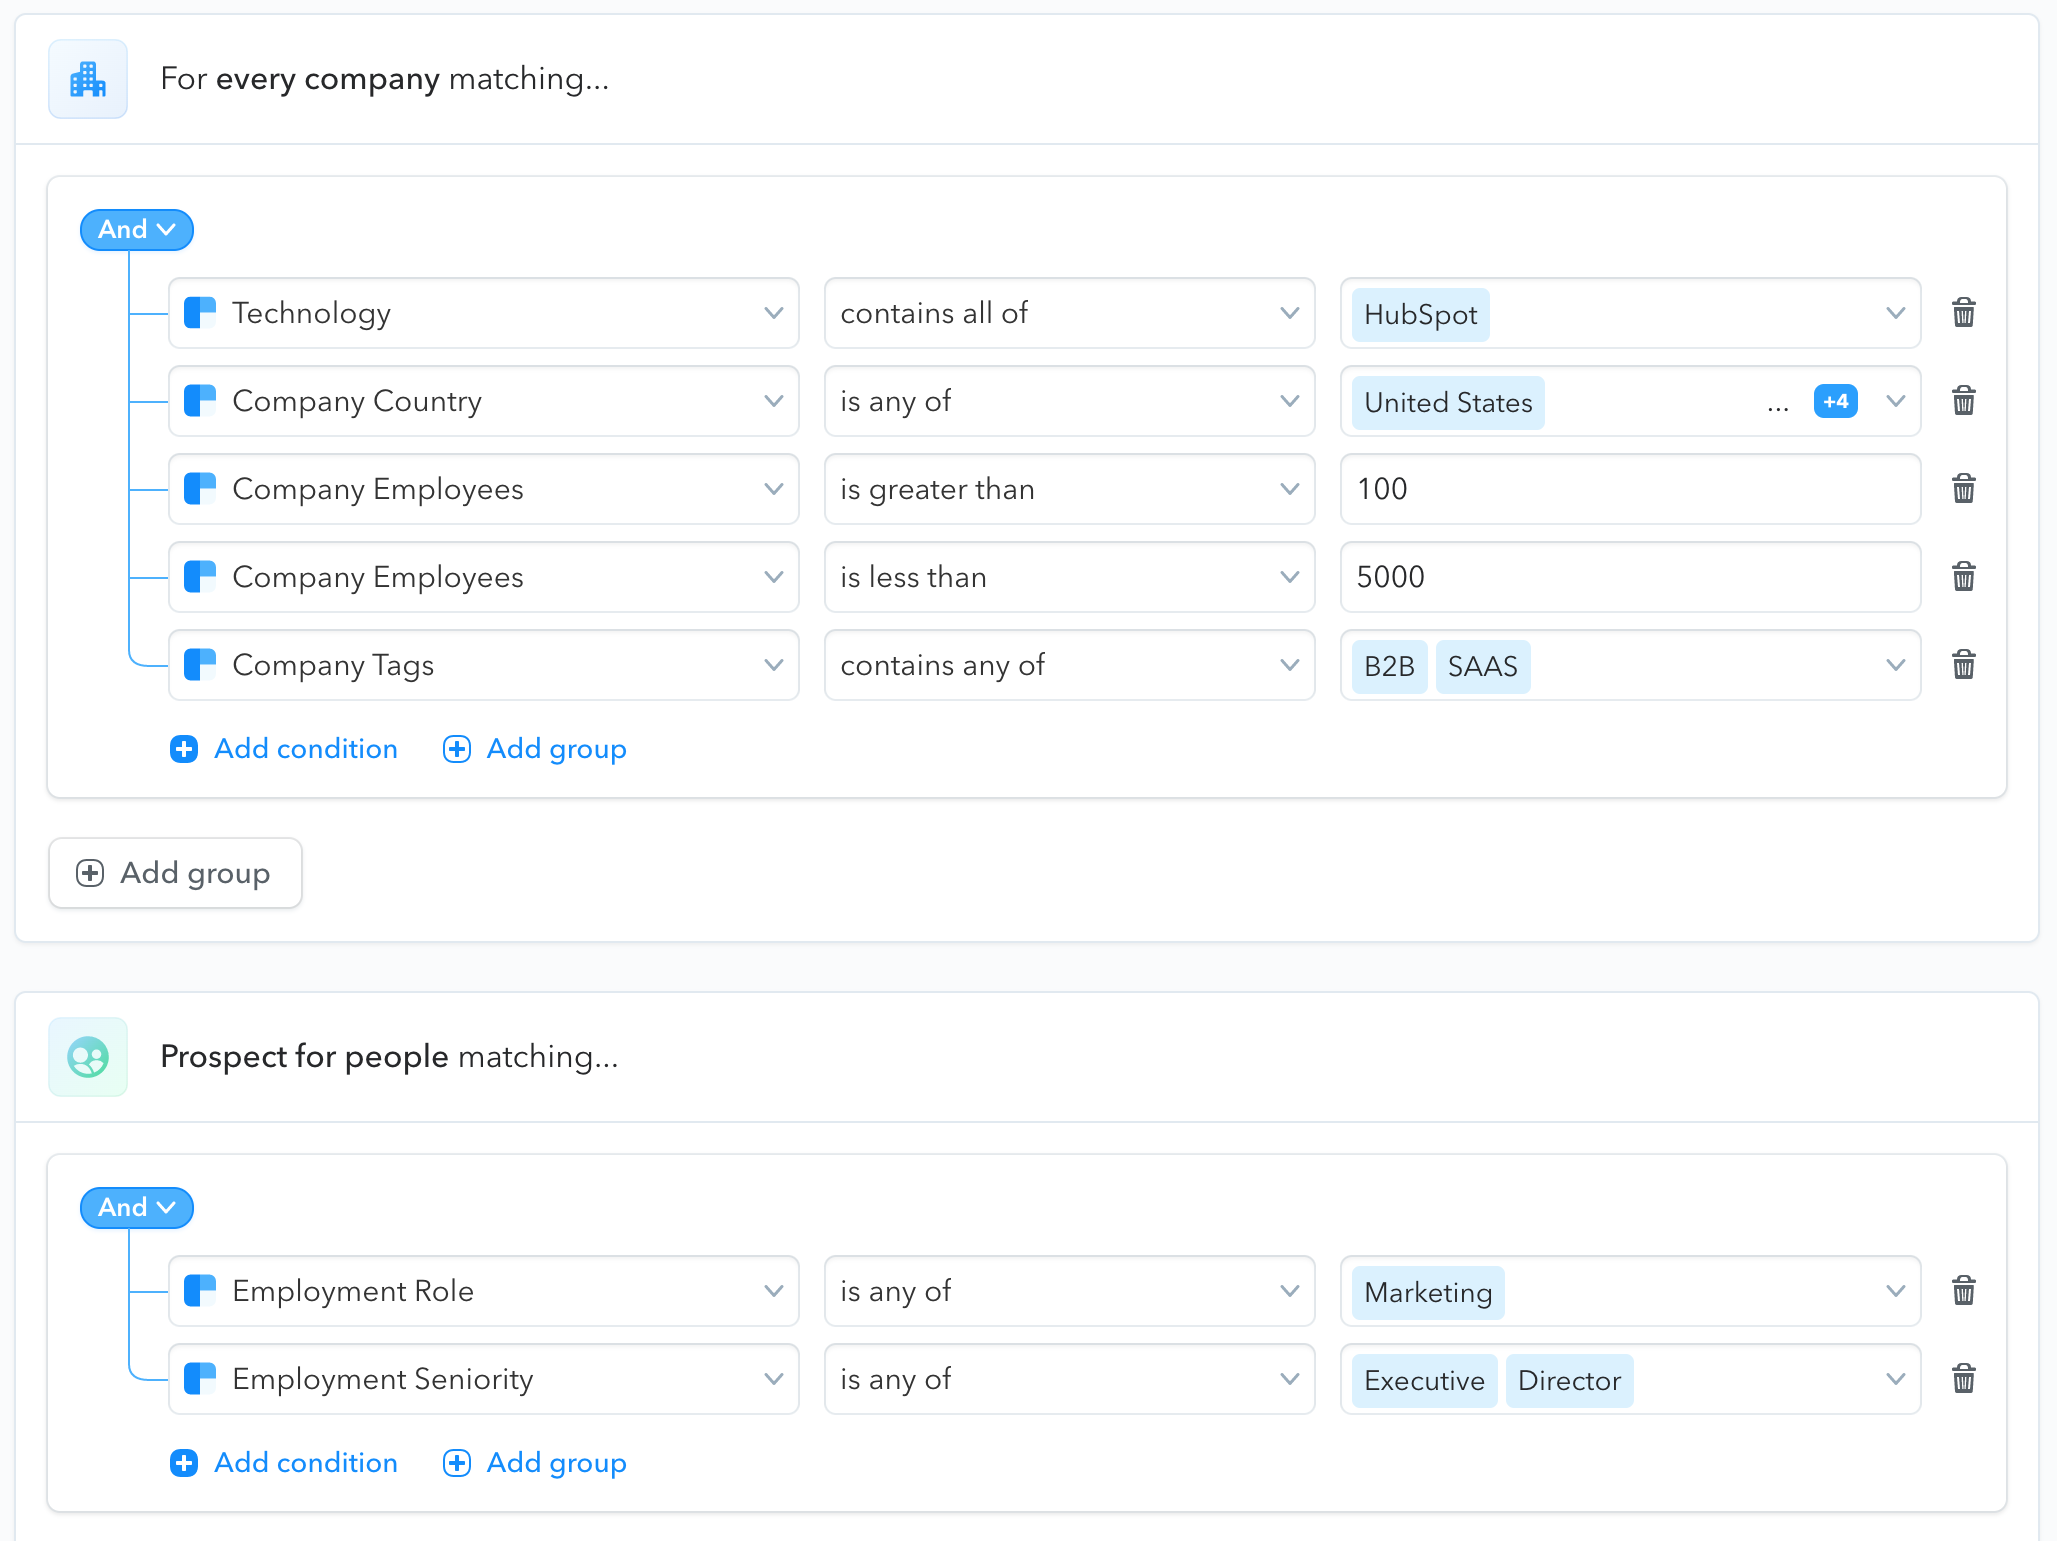 audience builder UI with rules to find people at companies according to specific B2B attributes